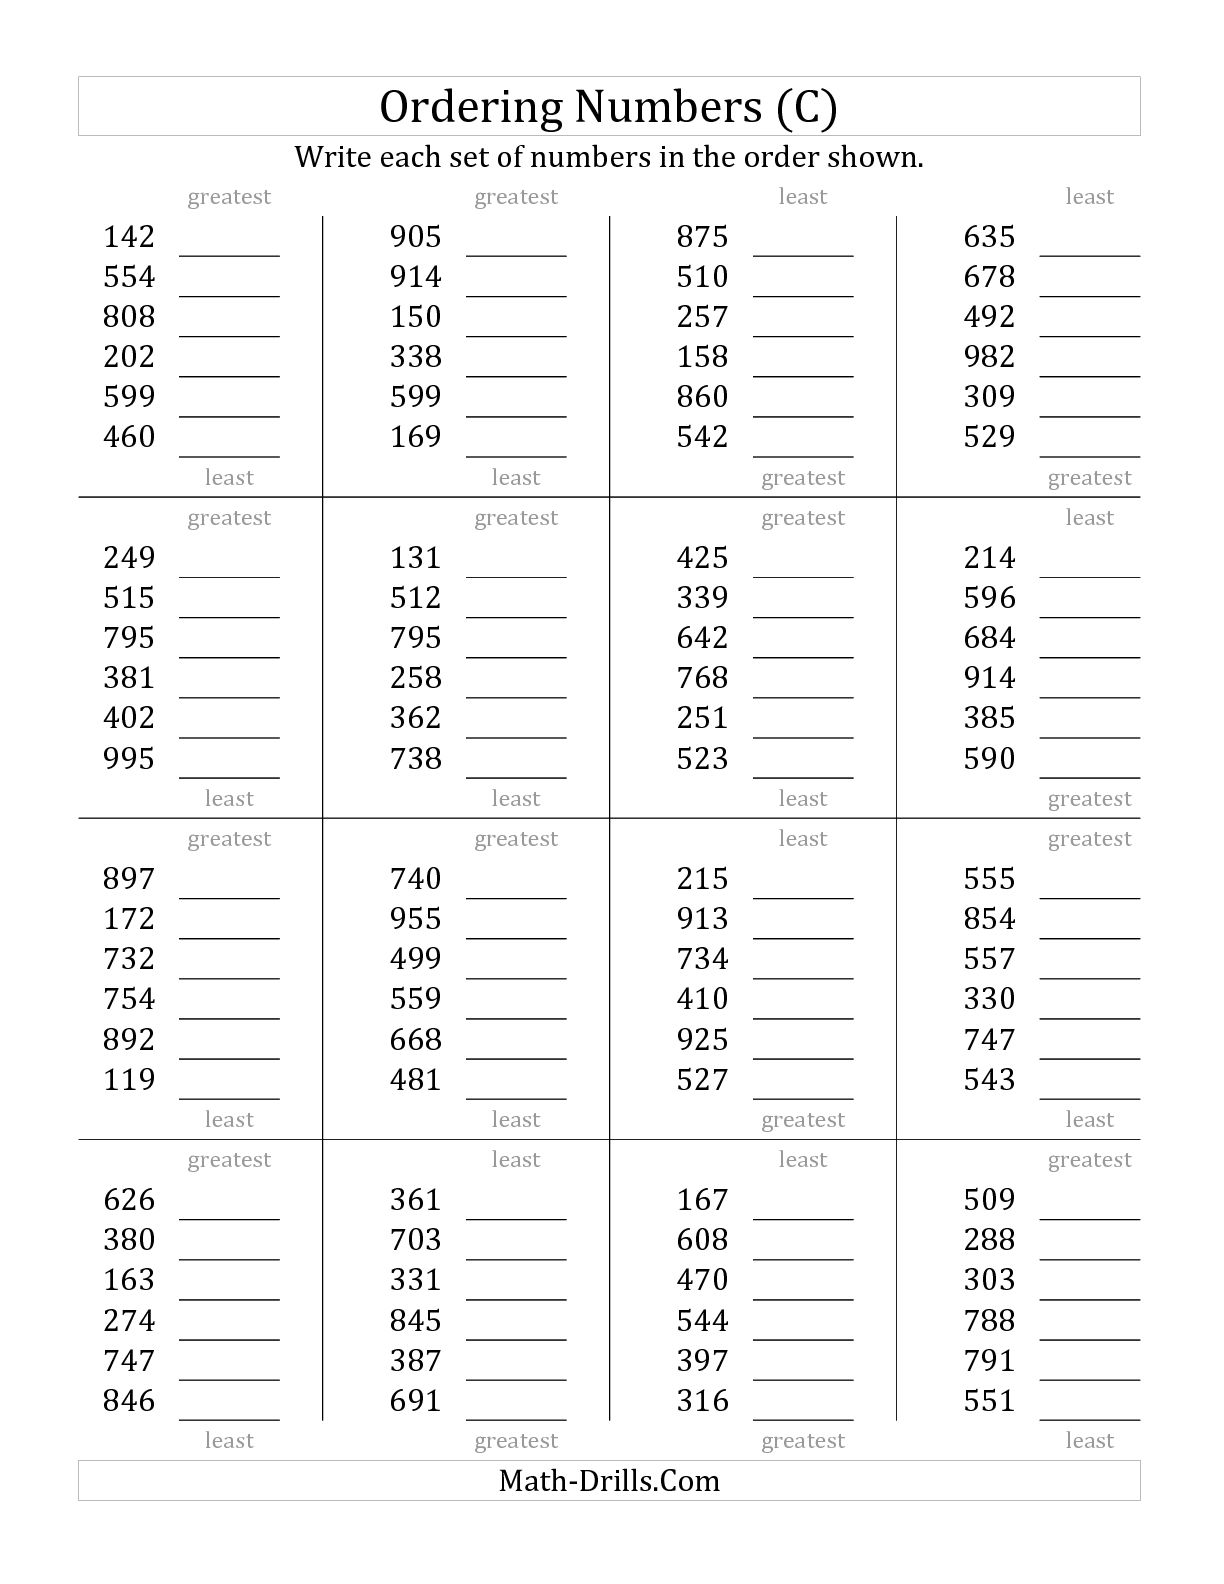 Ordering Numbers Worksheets for 4th Grade Math Image